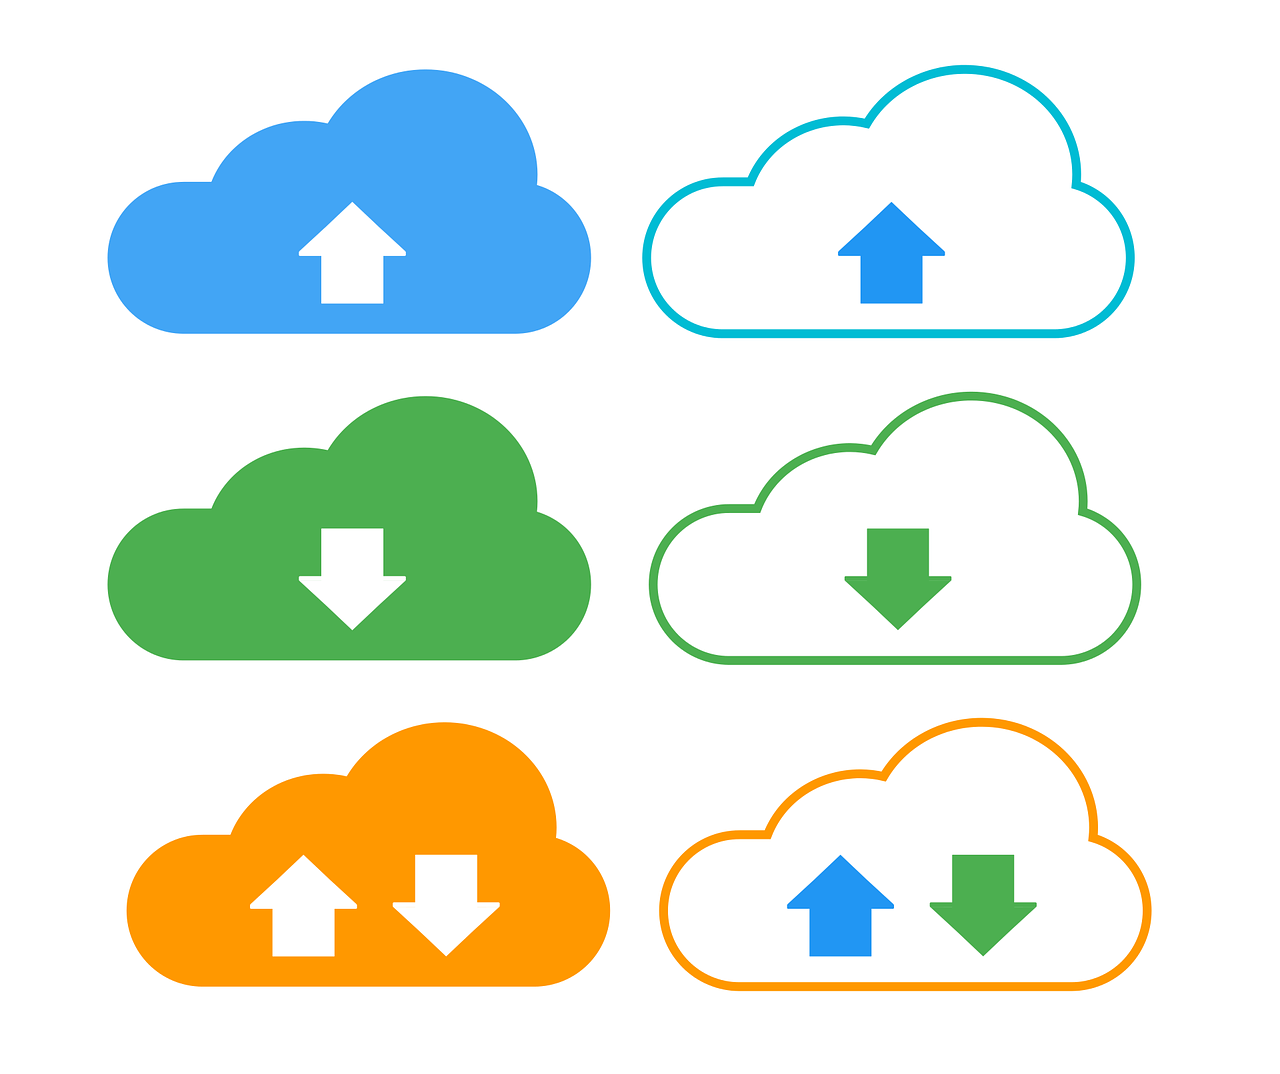 How Does Cloud Storage Work?